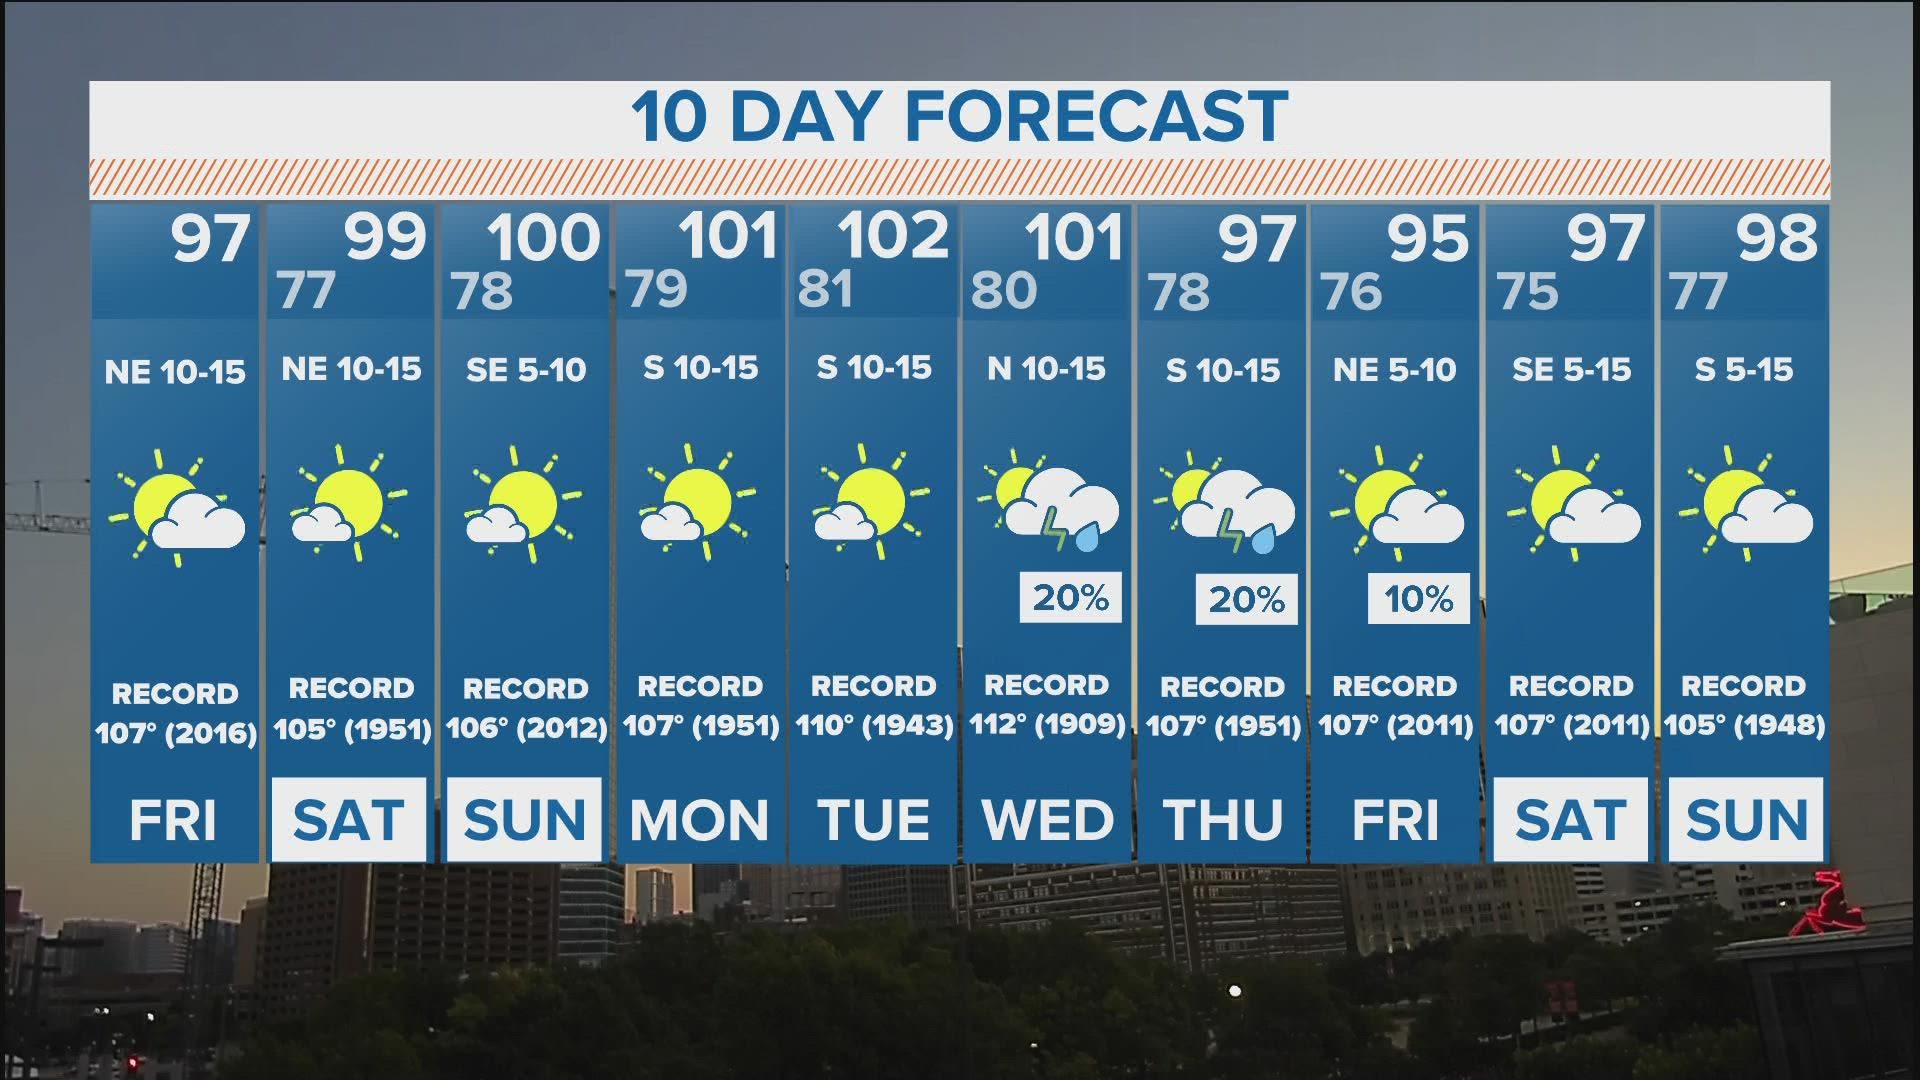 Looks like we're warming back up in DFW through the weekend!